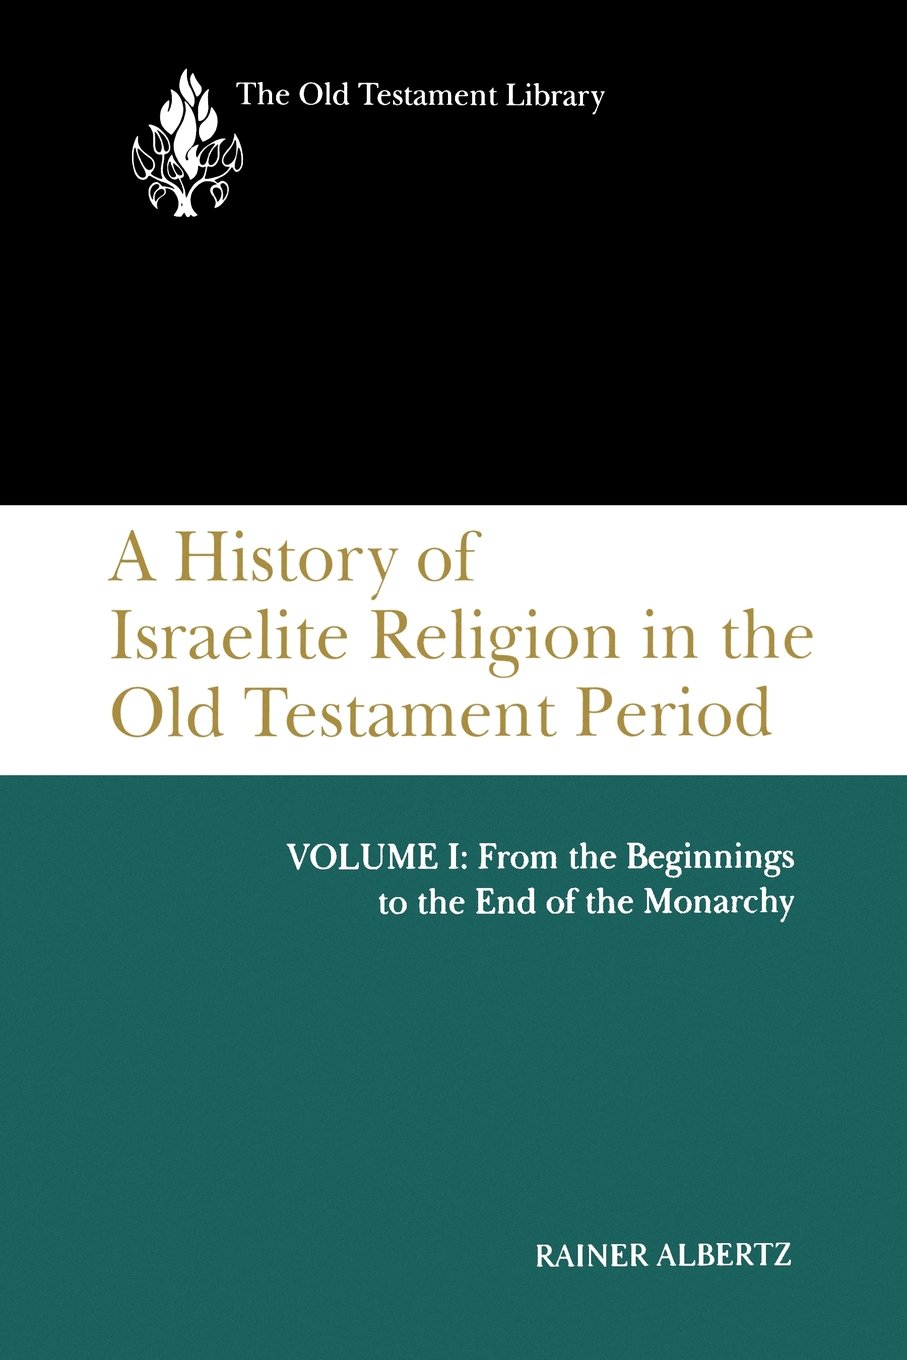 A History of Israelite Religion in the Old Testament Period, Volume I (1994)